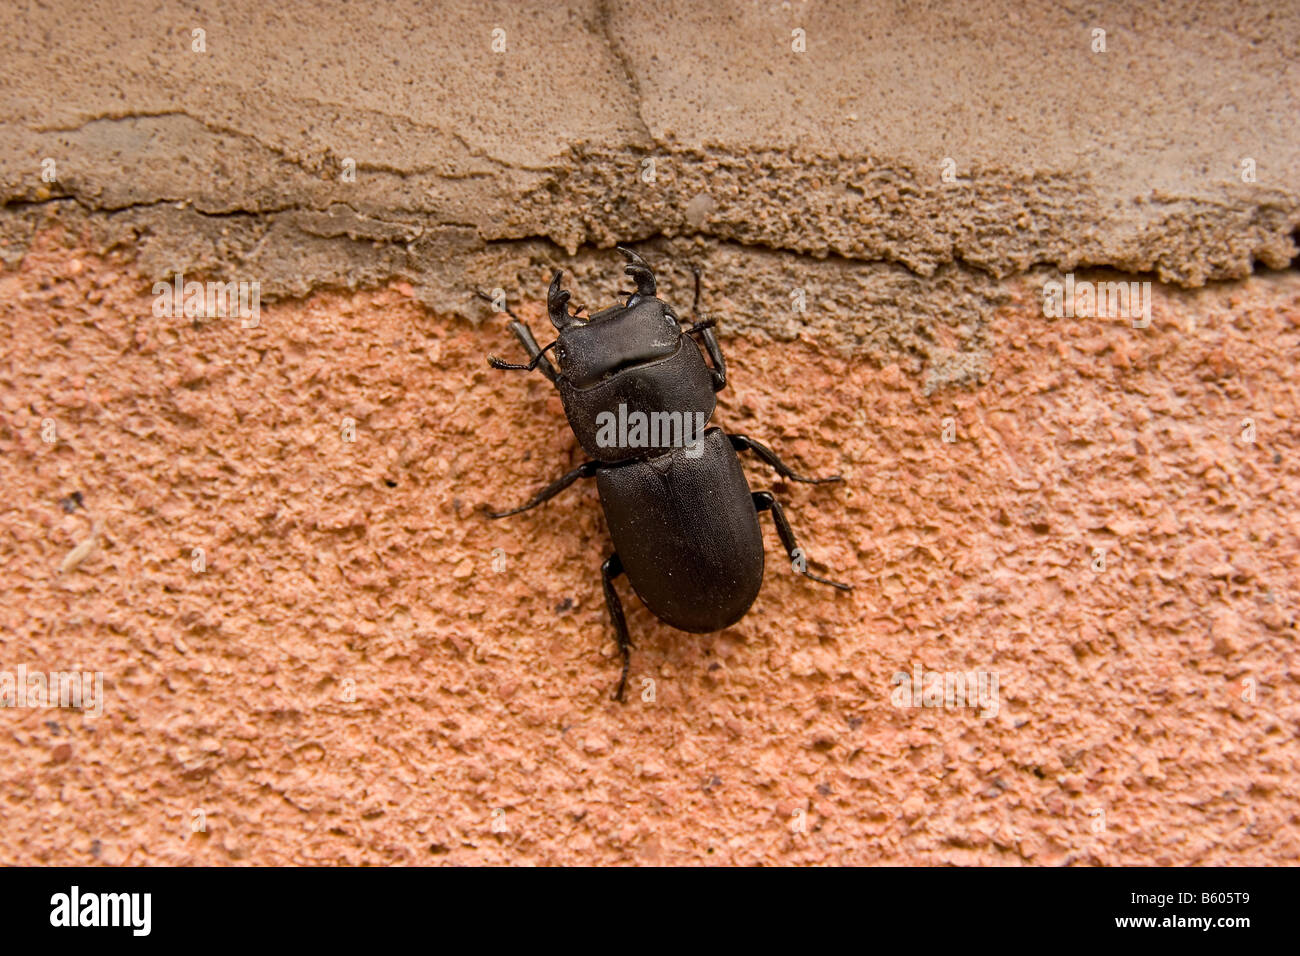 A Lesser Stag Beetle Dorcus parallelopipedus Stock Photo